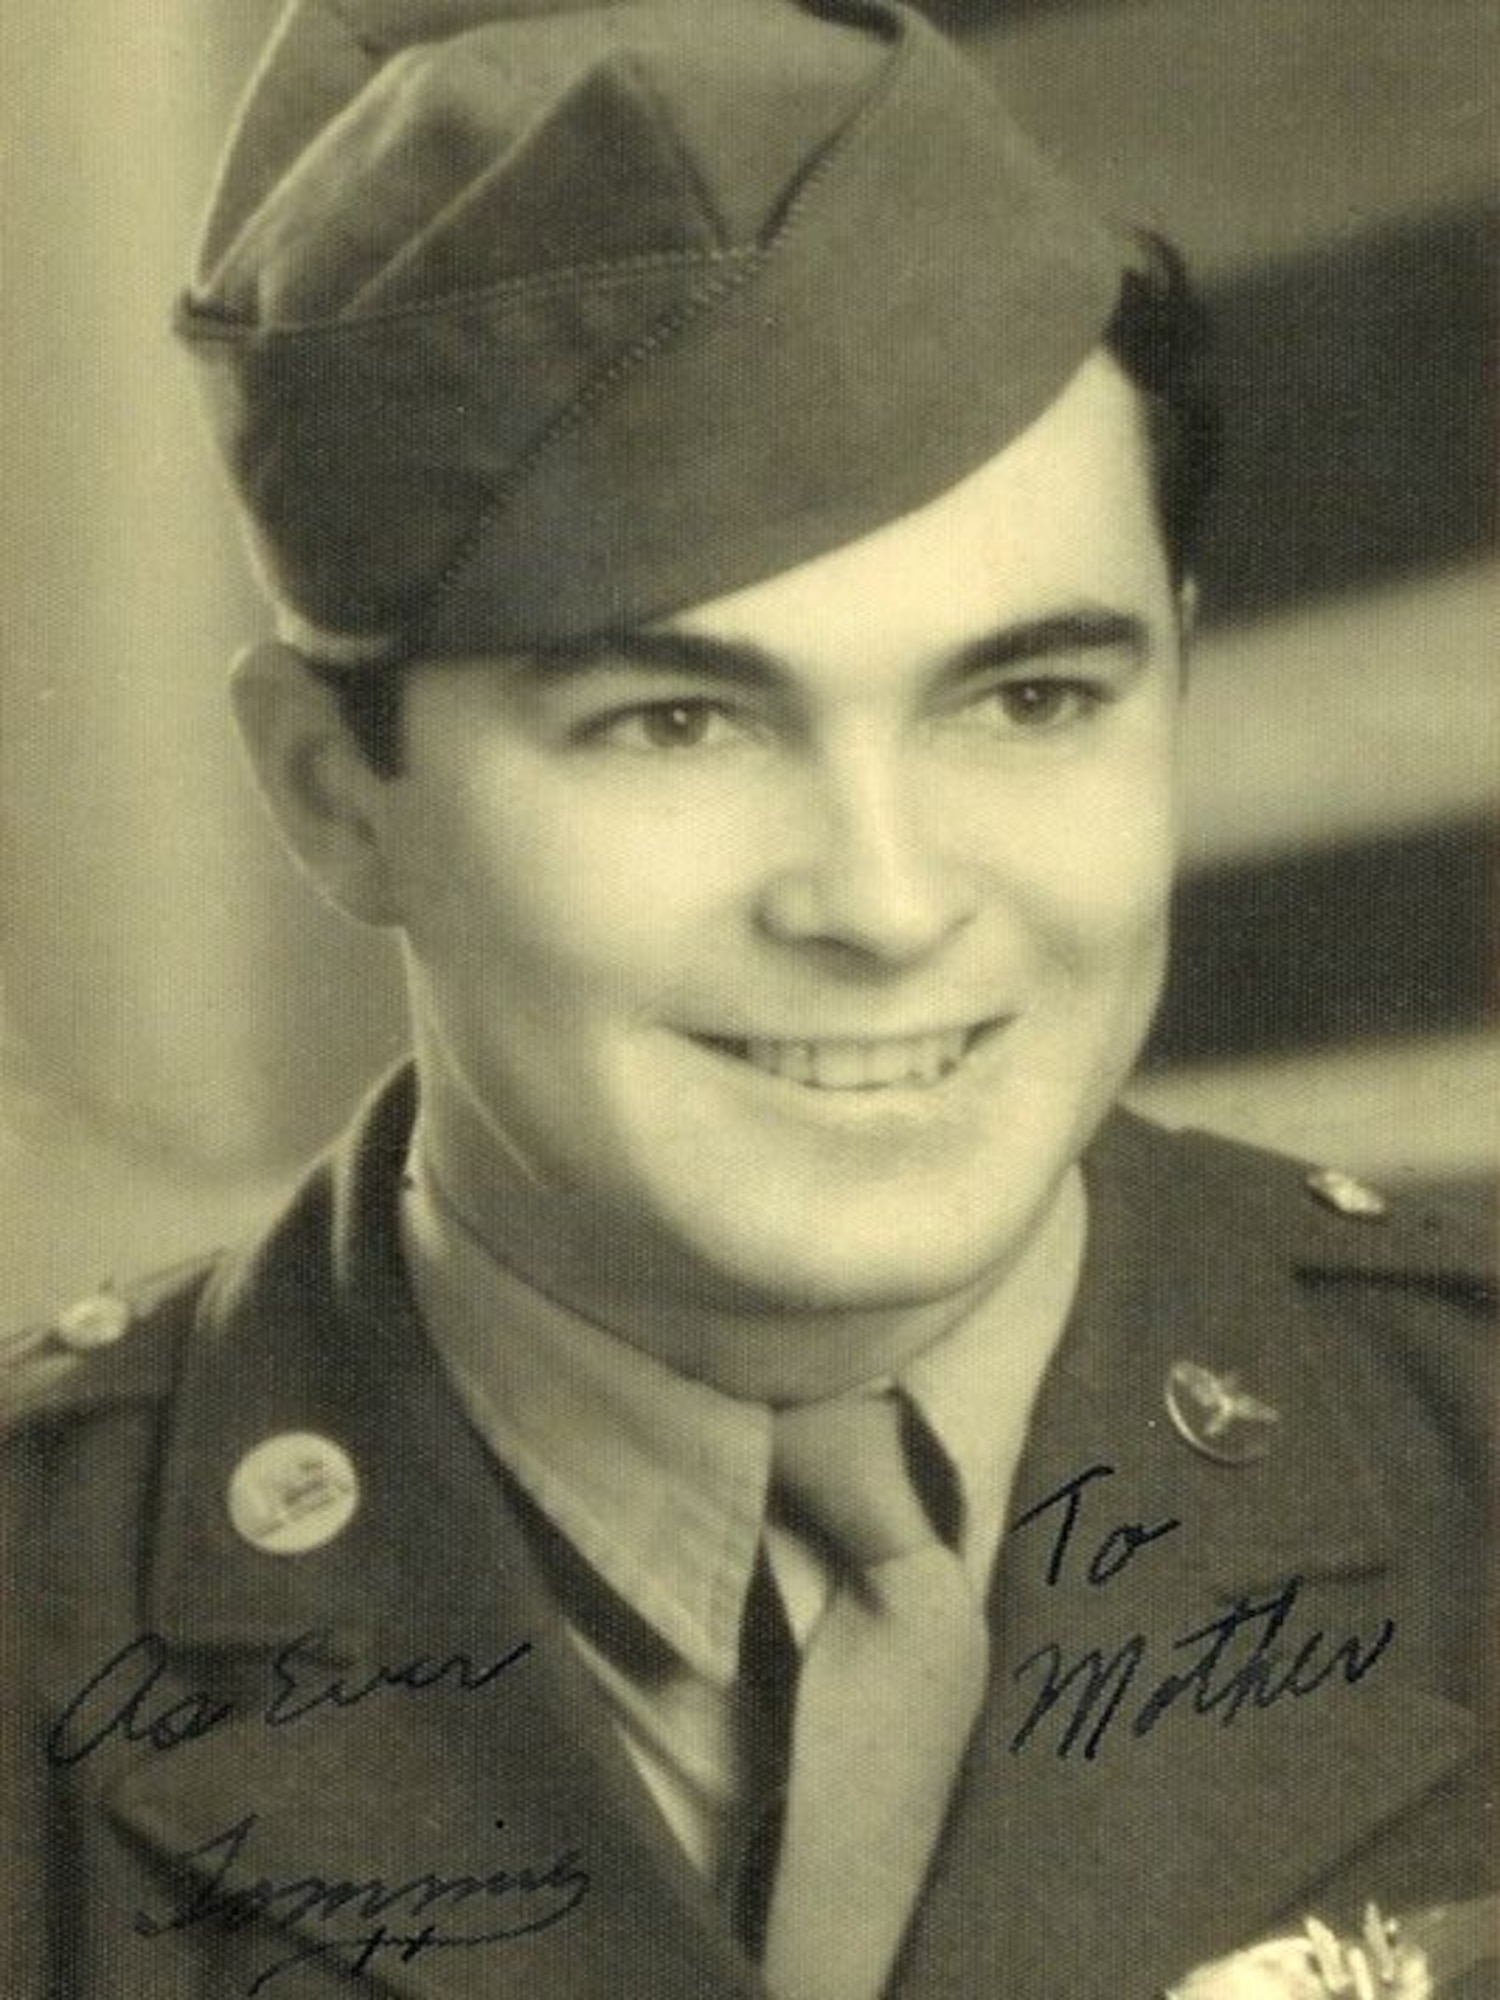 Thomas Boyd in a portrait taken circa 1945. Boyd served as a B-24 Liberator tail gunner for the 455th Bomb Group during World War II. (Courtesy Photo)